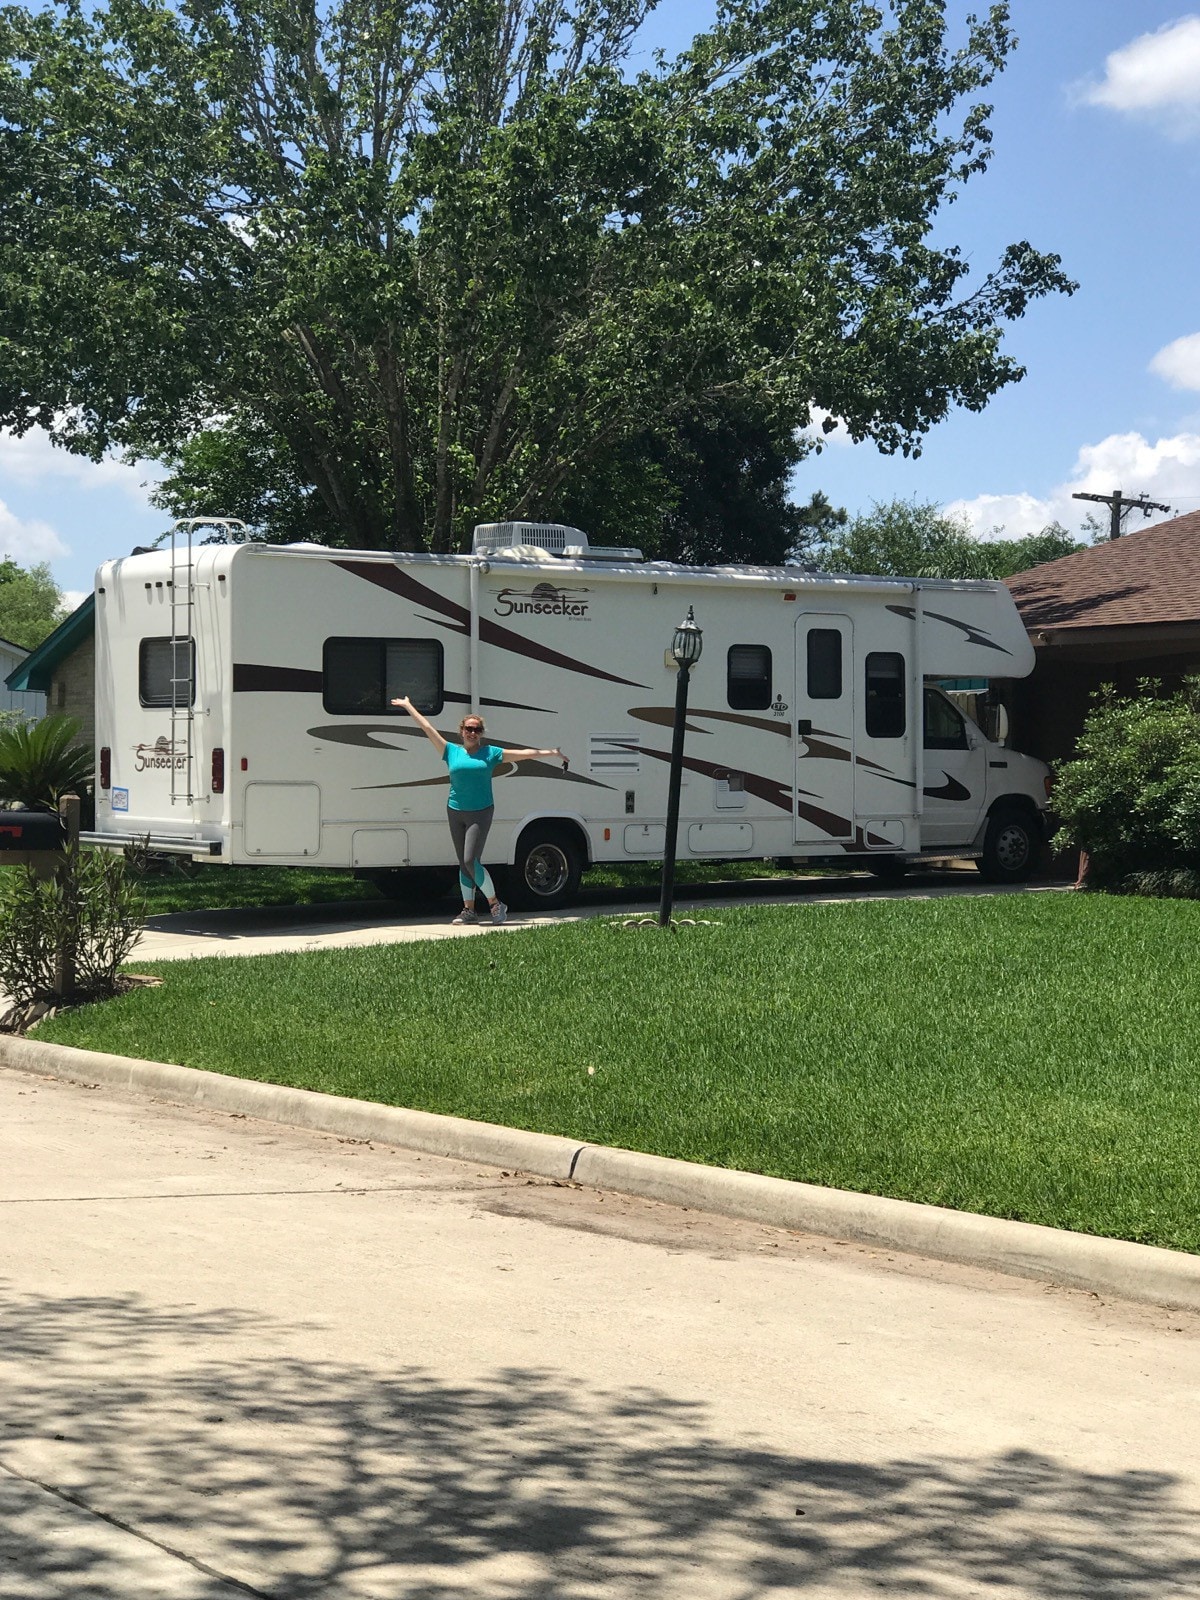 RV: Home away from home